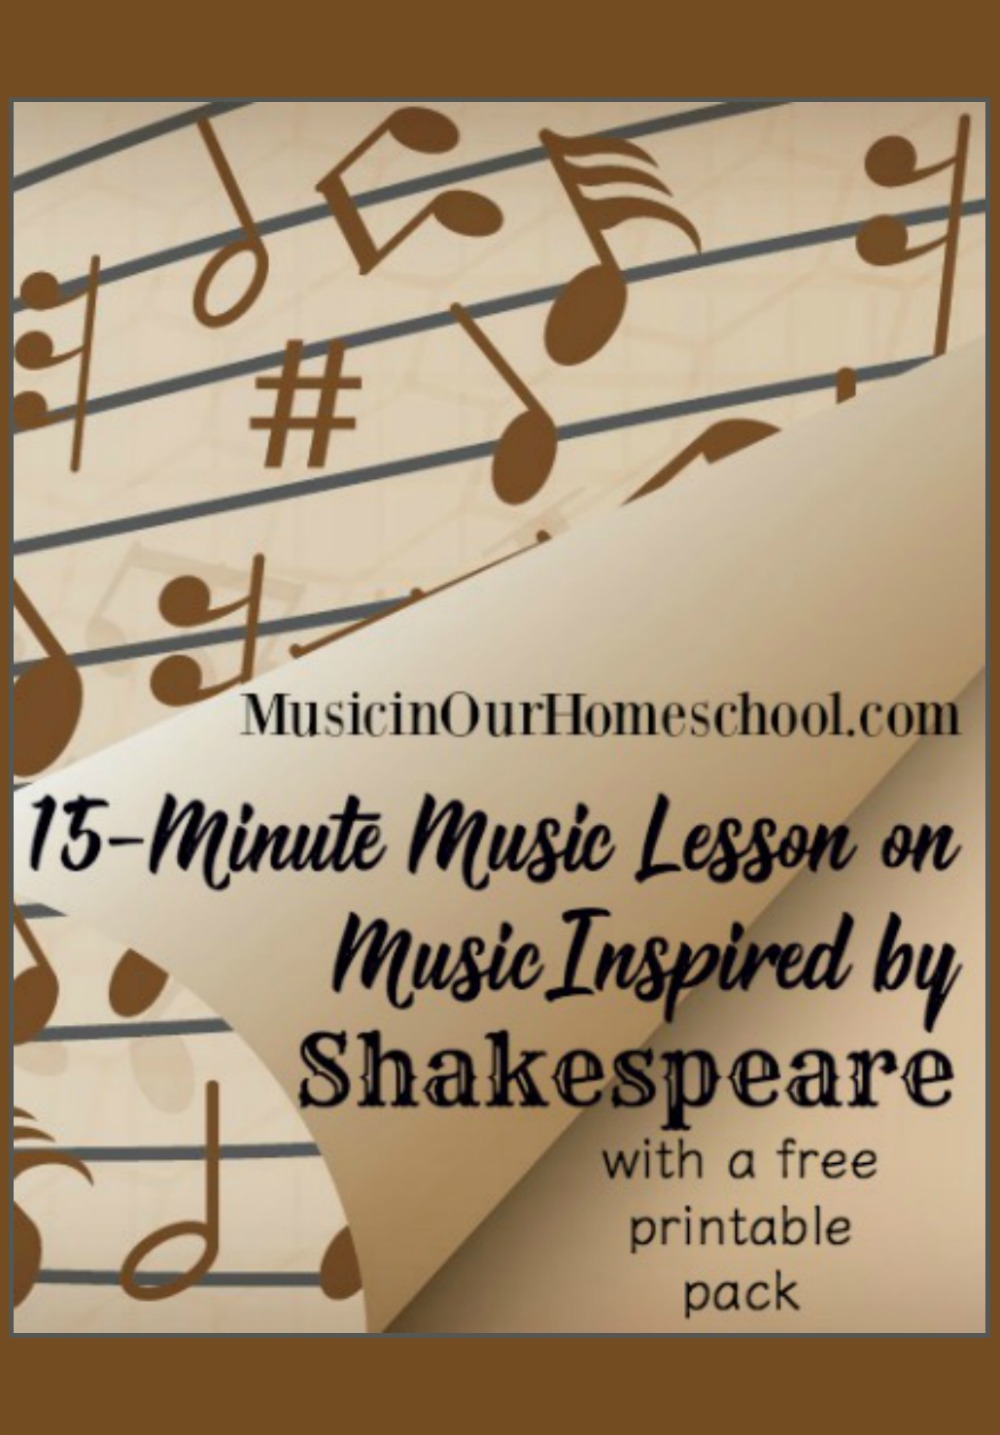 15-Minute Music Lesson on Music Inspired By Shakespeare at Music in Our Homeschool #music #homeschoolmusic #musicappreciation #Shakespeare